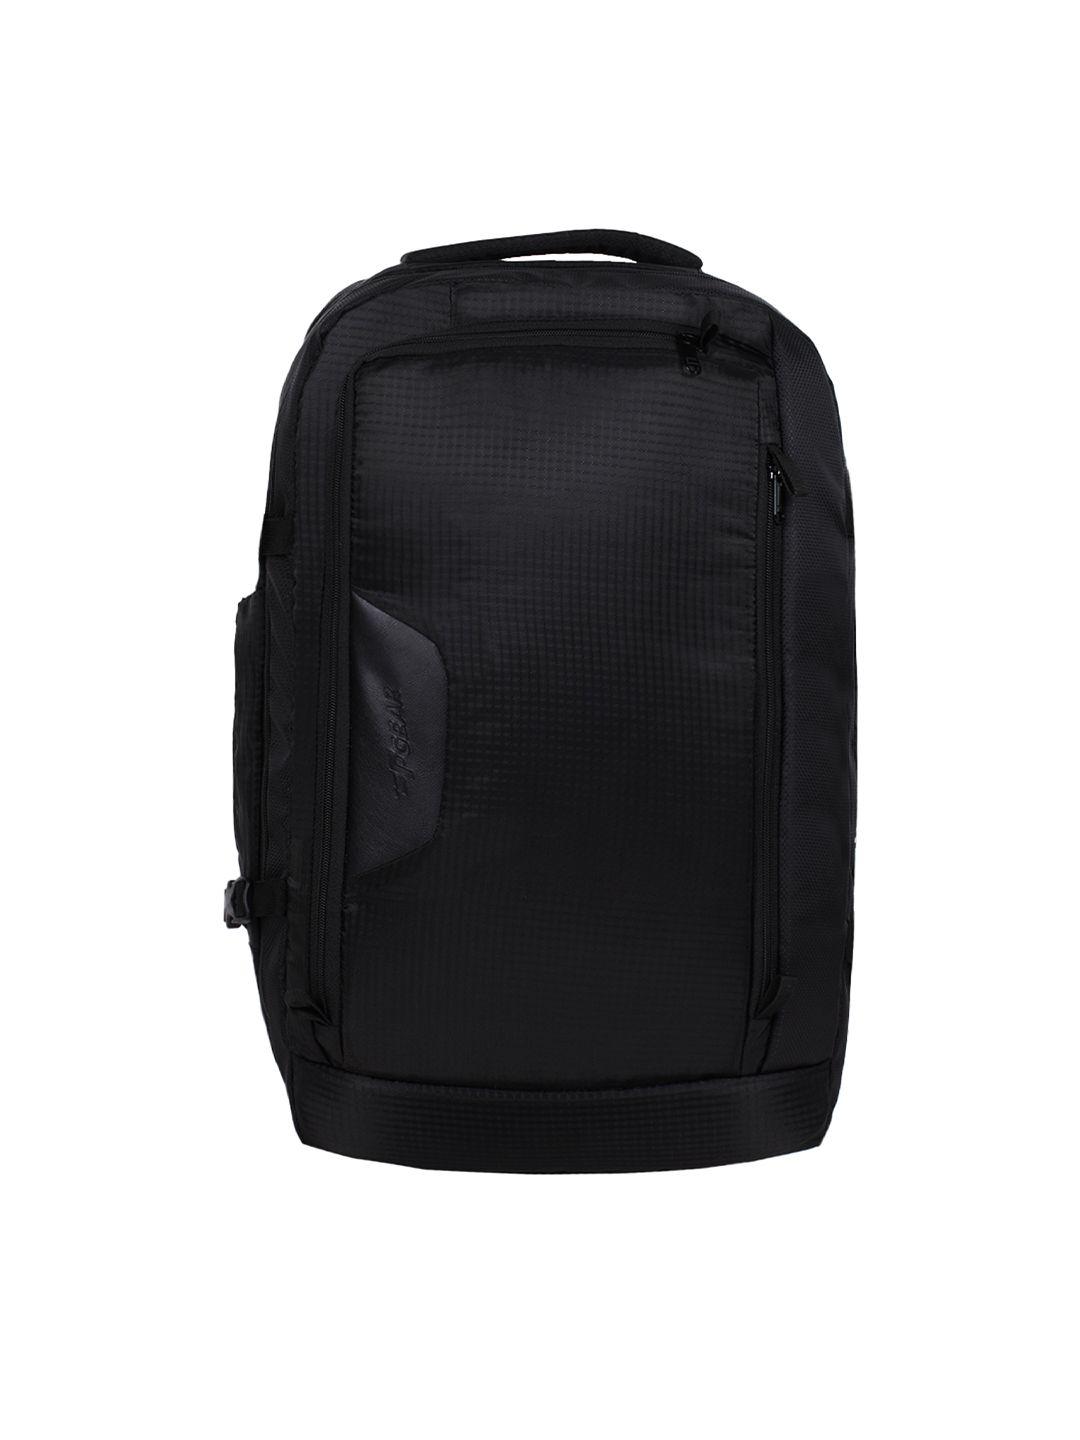 f gear unisex black solid backpack